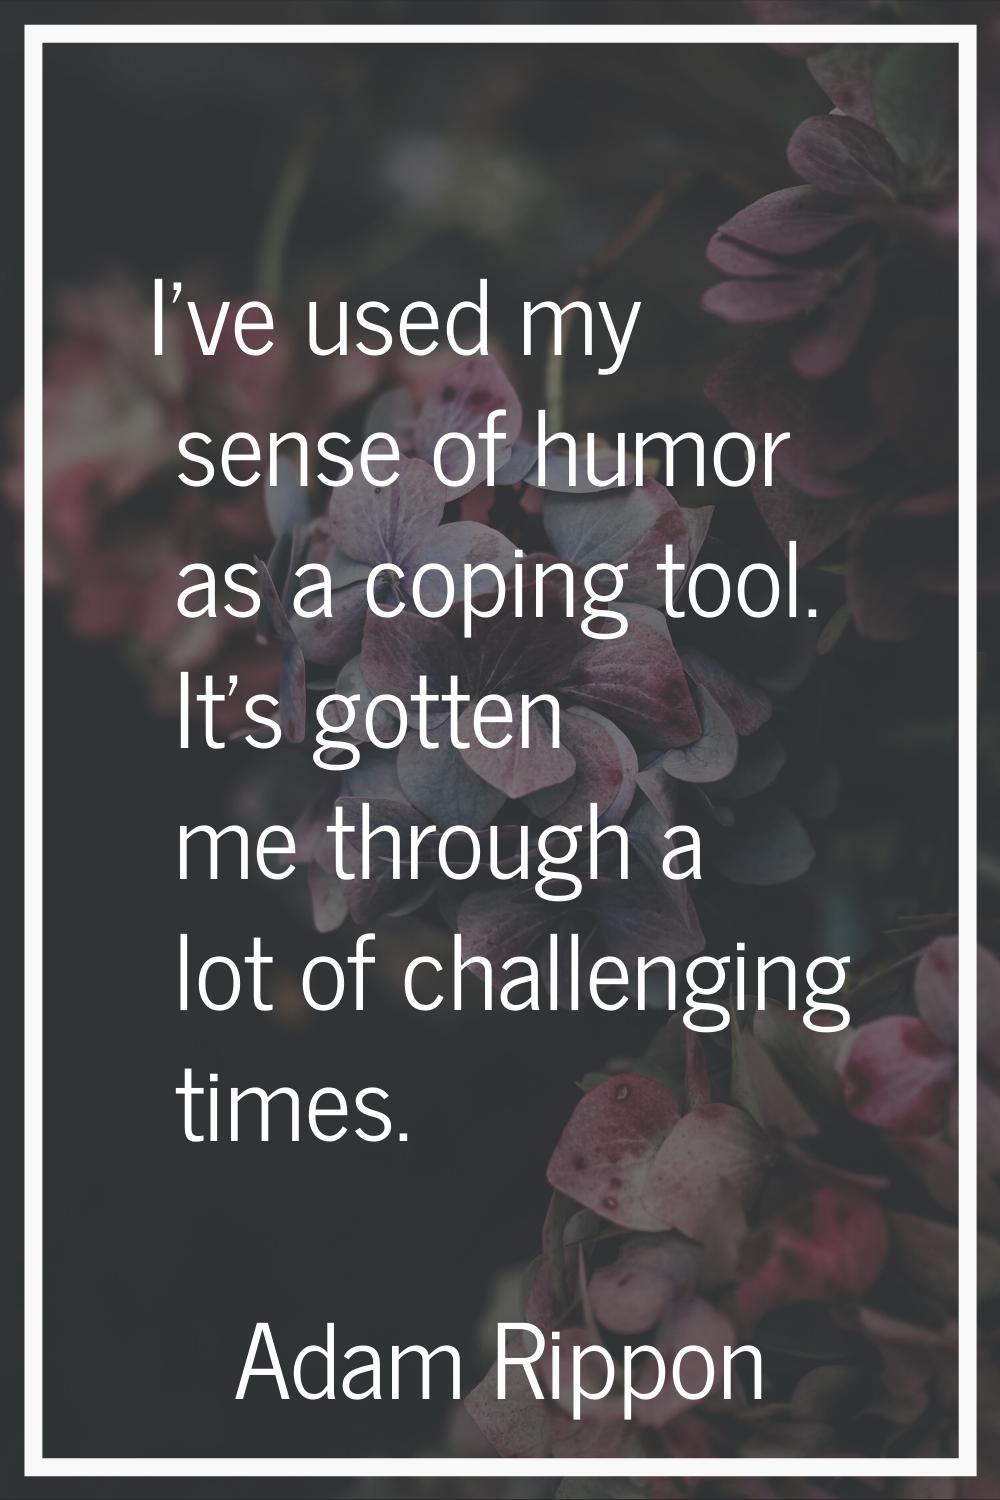 I've used my sense of humor as a coping tool. It's gotten me through a lot of challenging times.